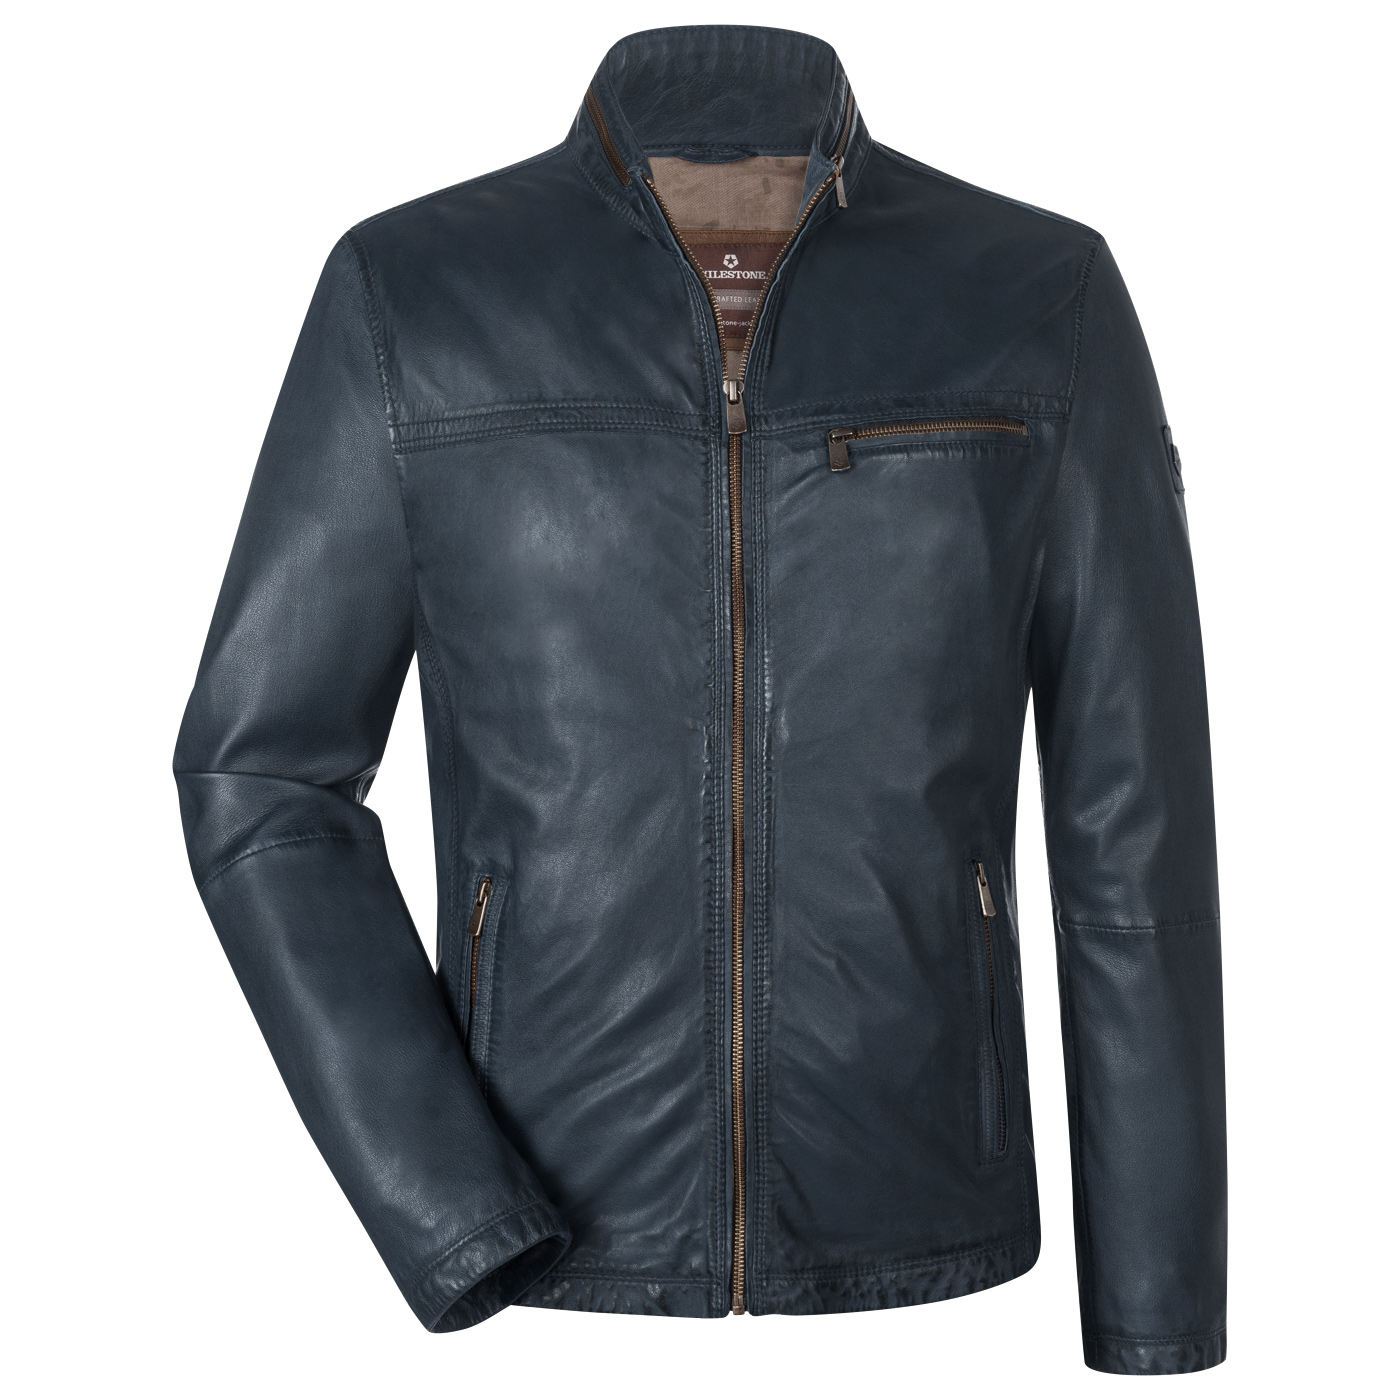 Vars World Leather Jackets in blue